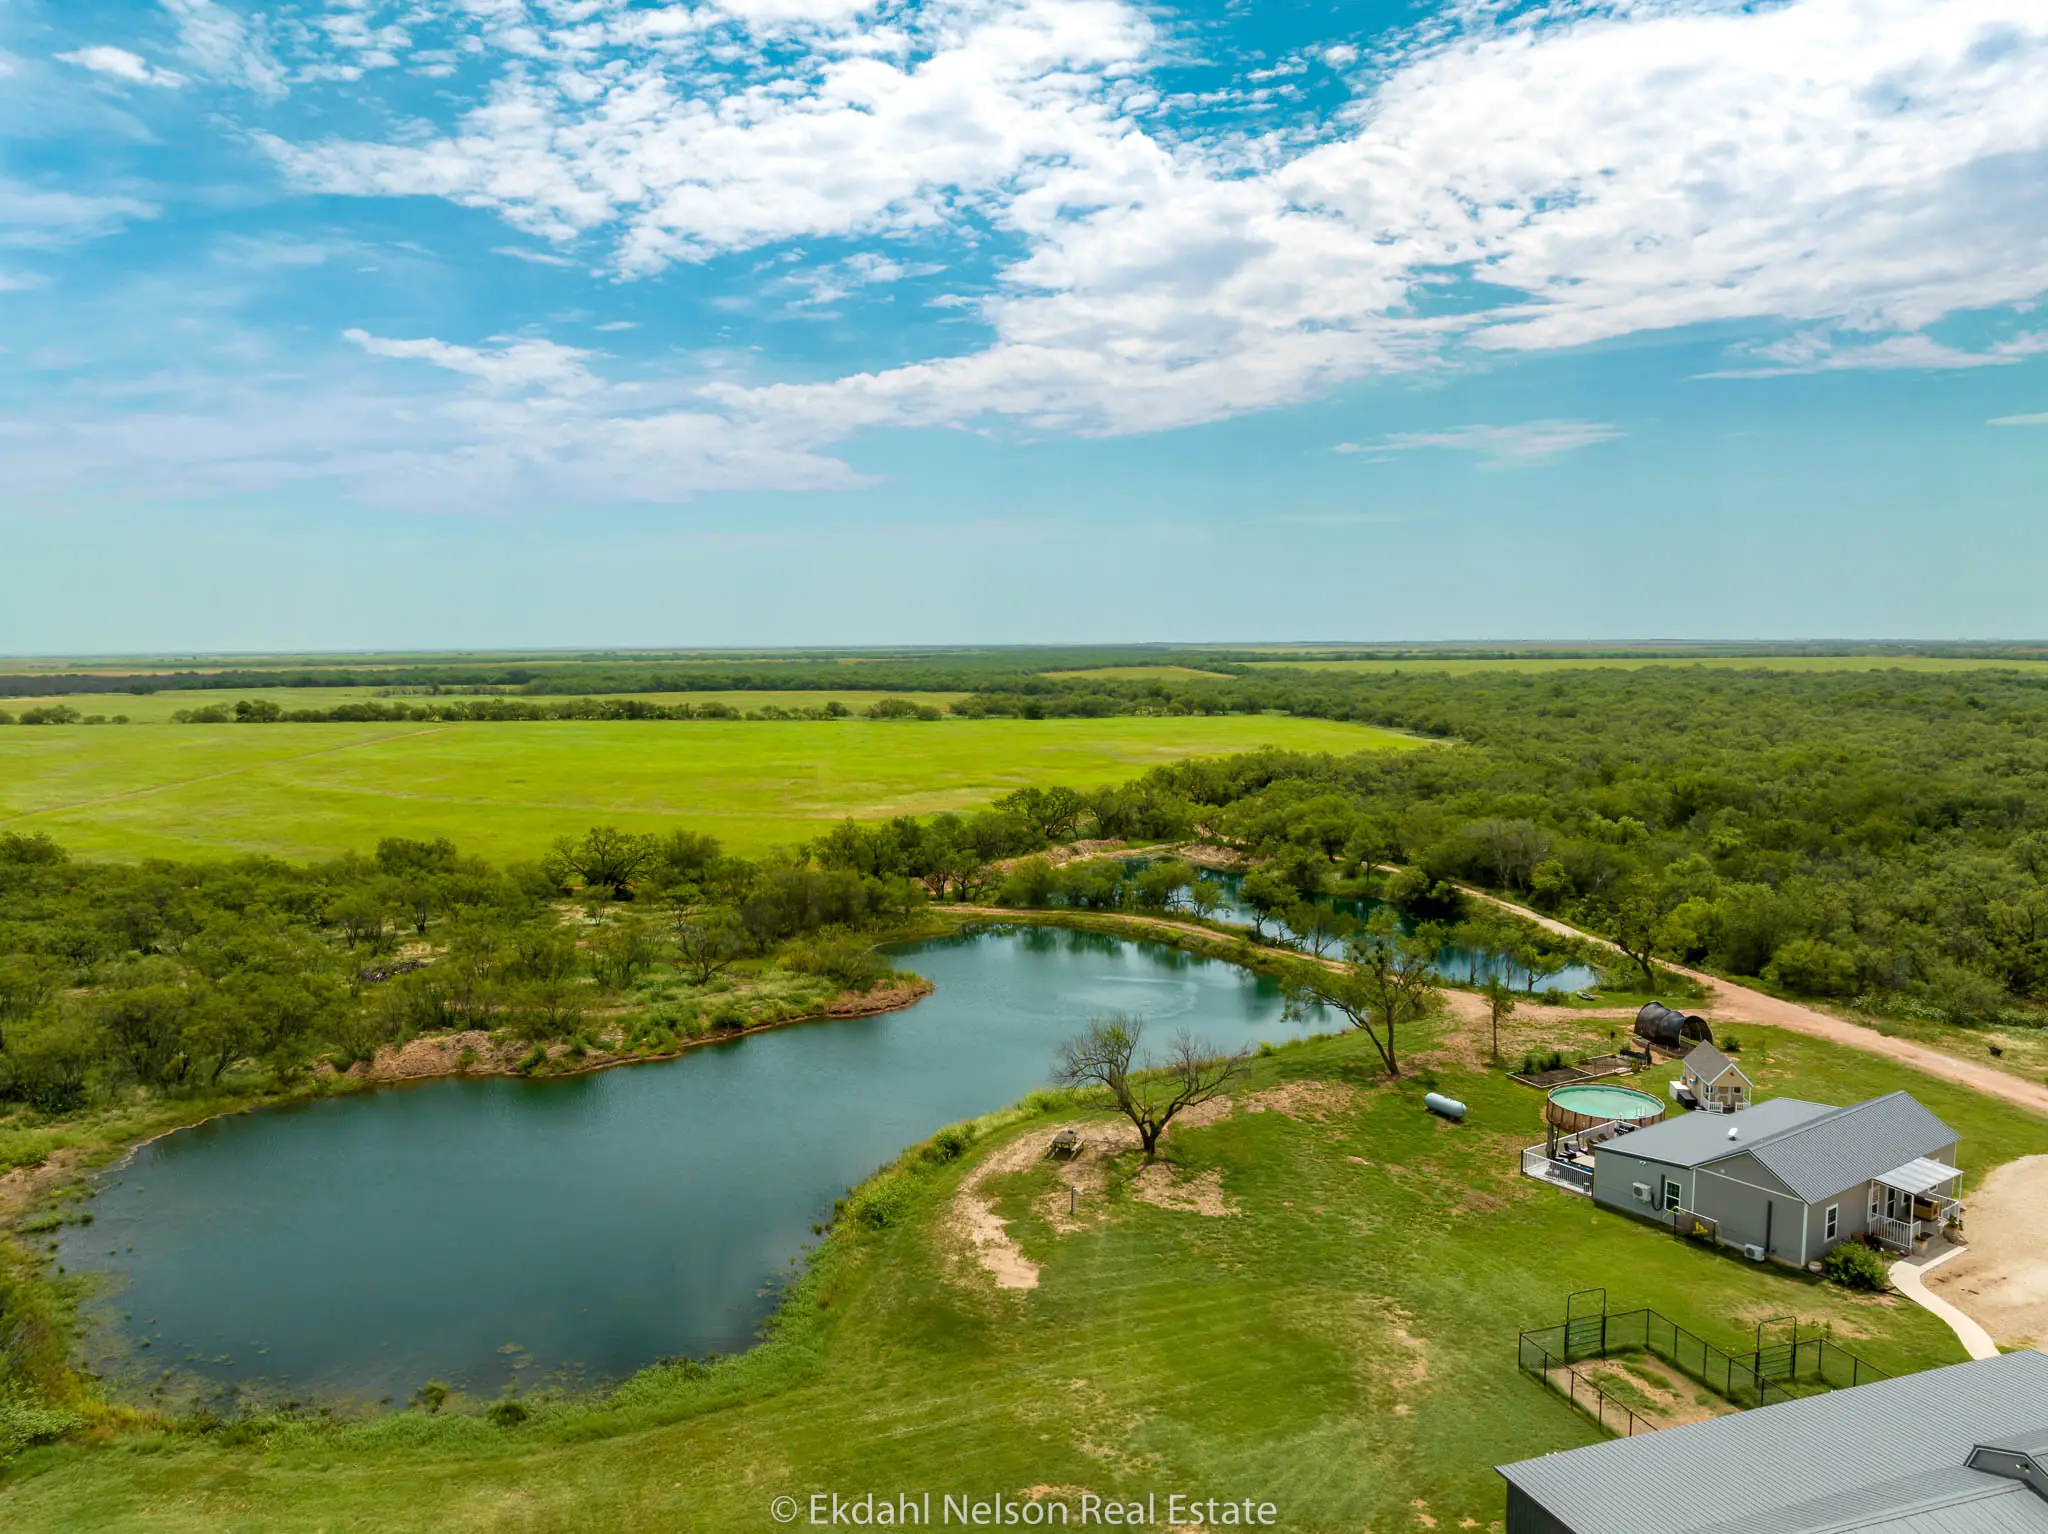 Image of winding creek ranch to convey what to look for in Hunting Ranches for Sale in Texas - Ekdahl Nelson Real Estate